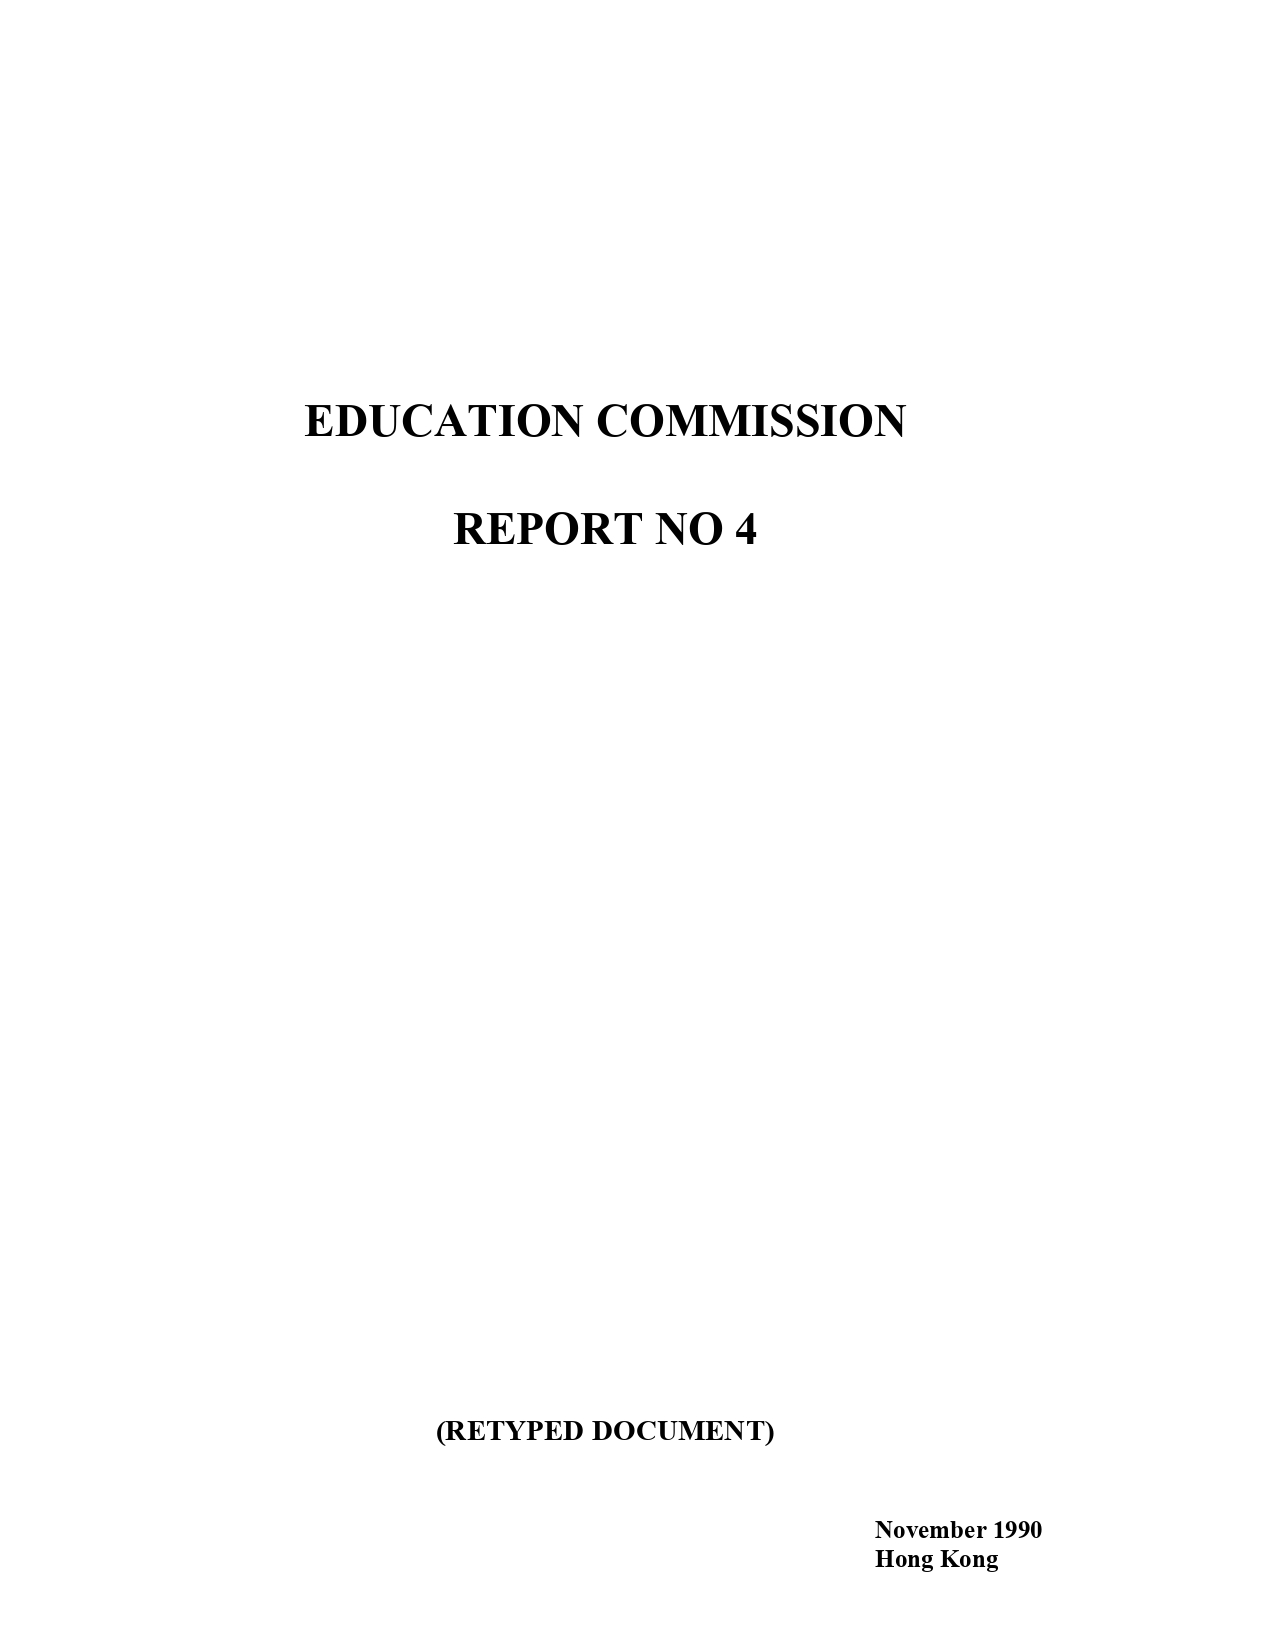 Education Commission Report No. 4